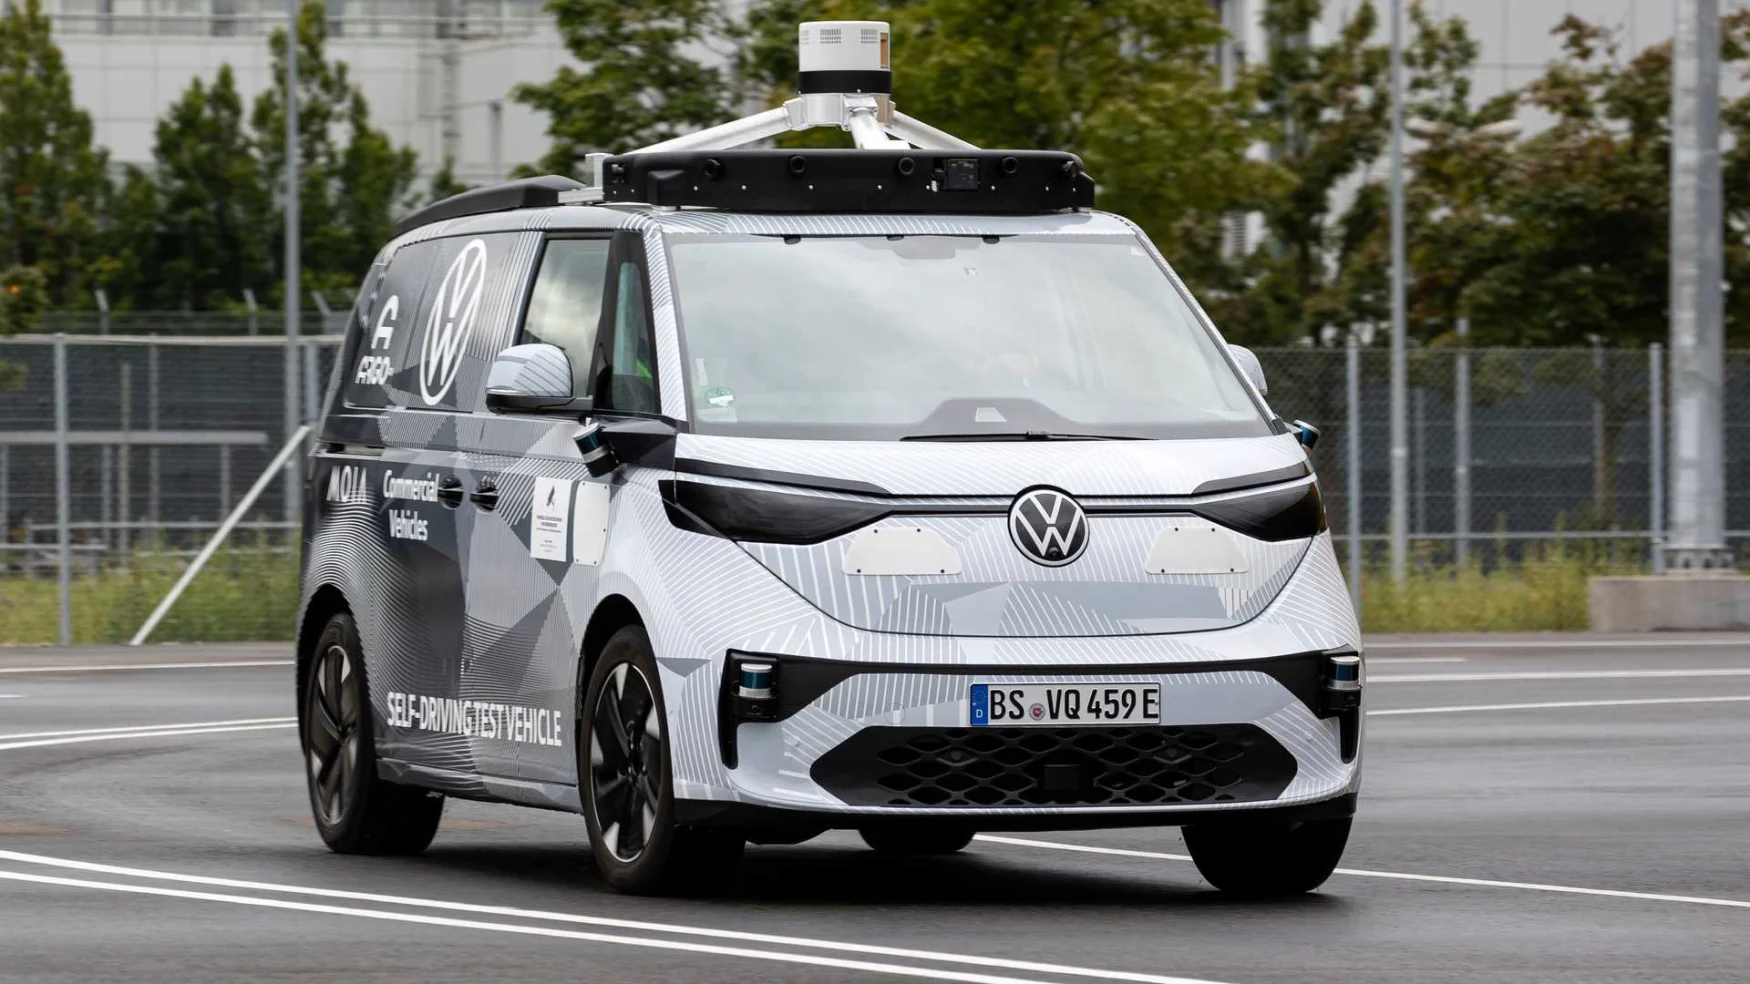 Volkswagen's ID.Buzz electric minivan appears as a self-driving prototype